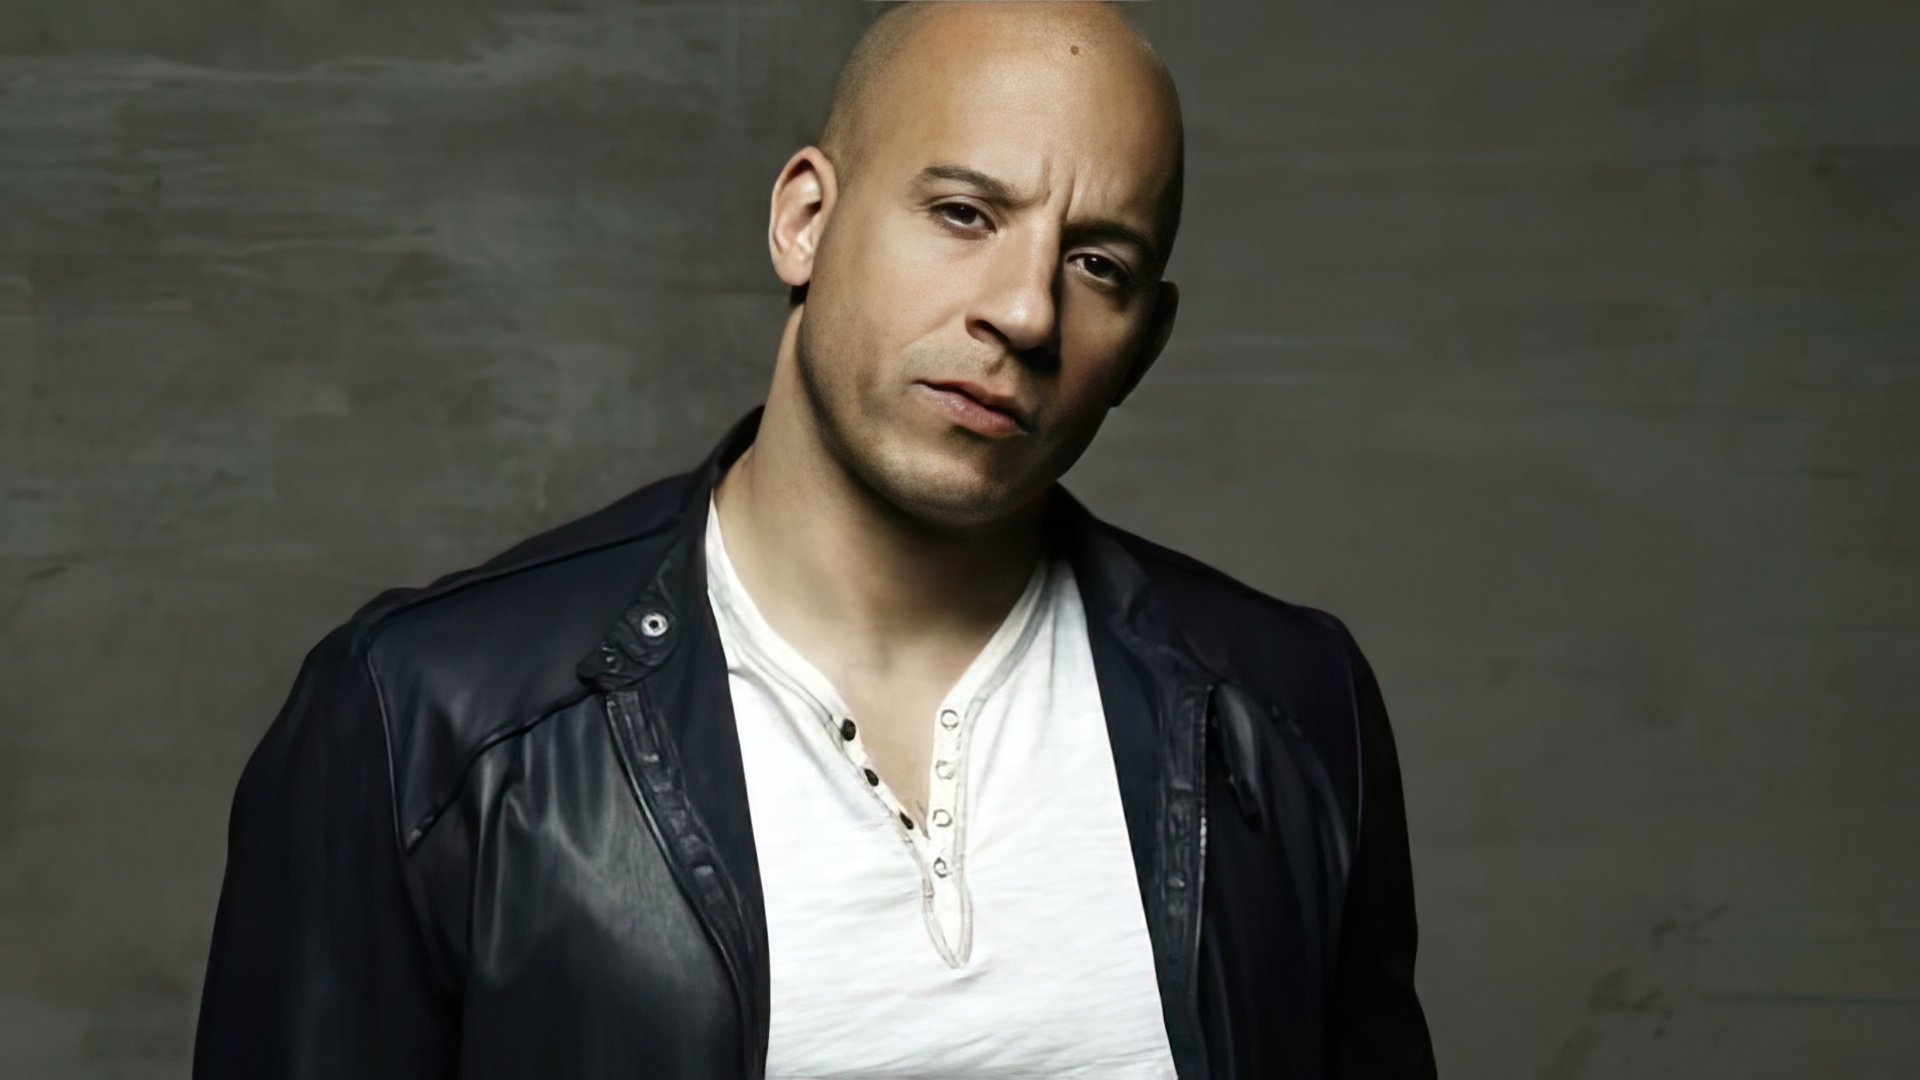 Vin Diesel is an action star and a family man